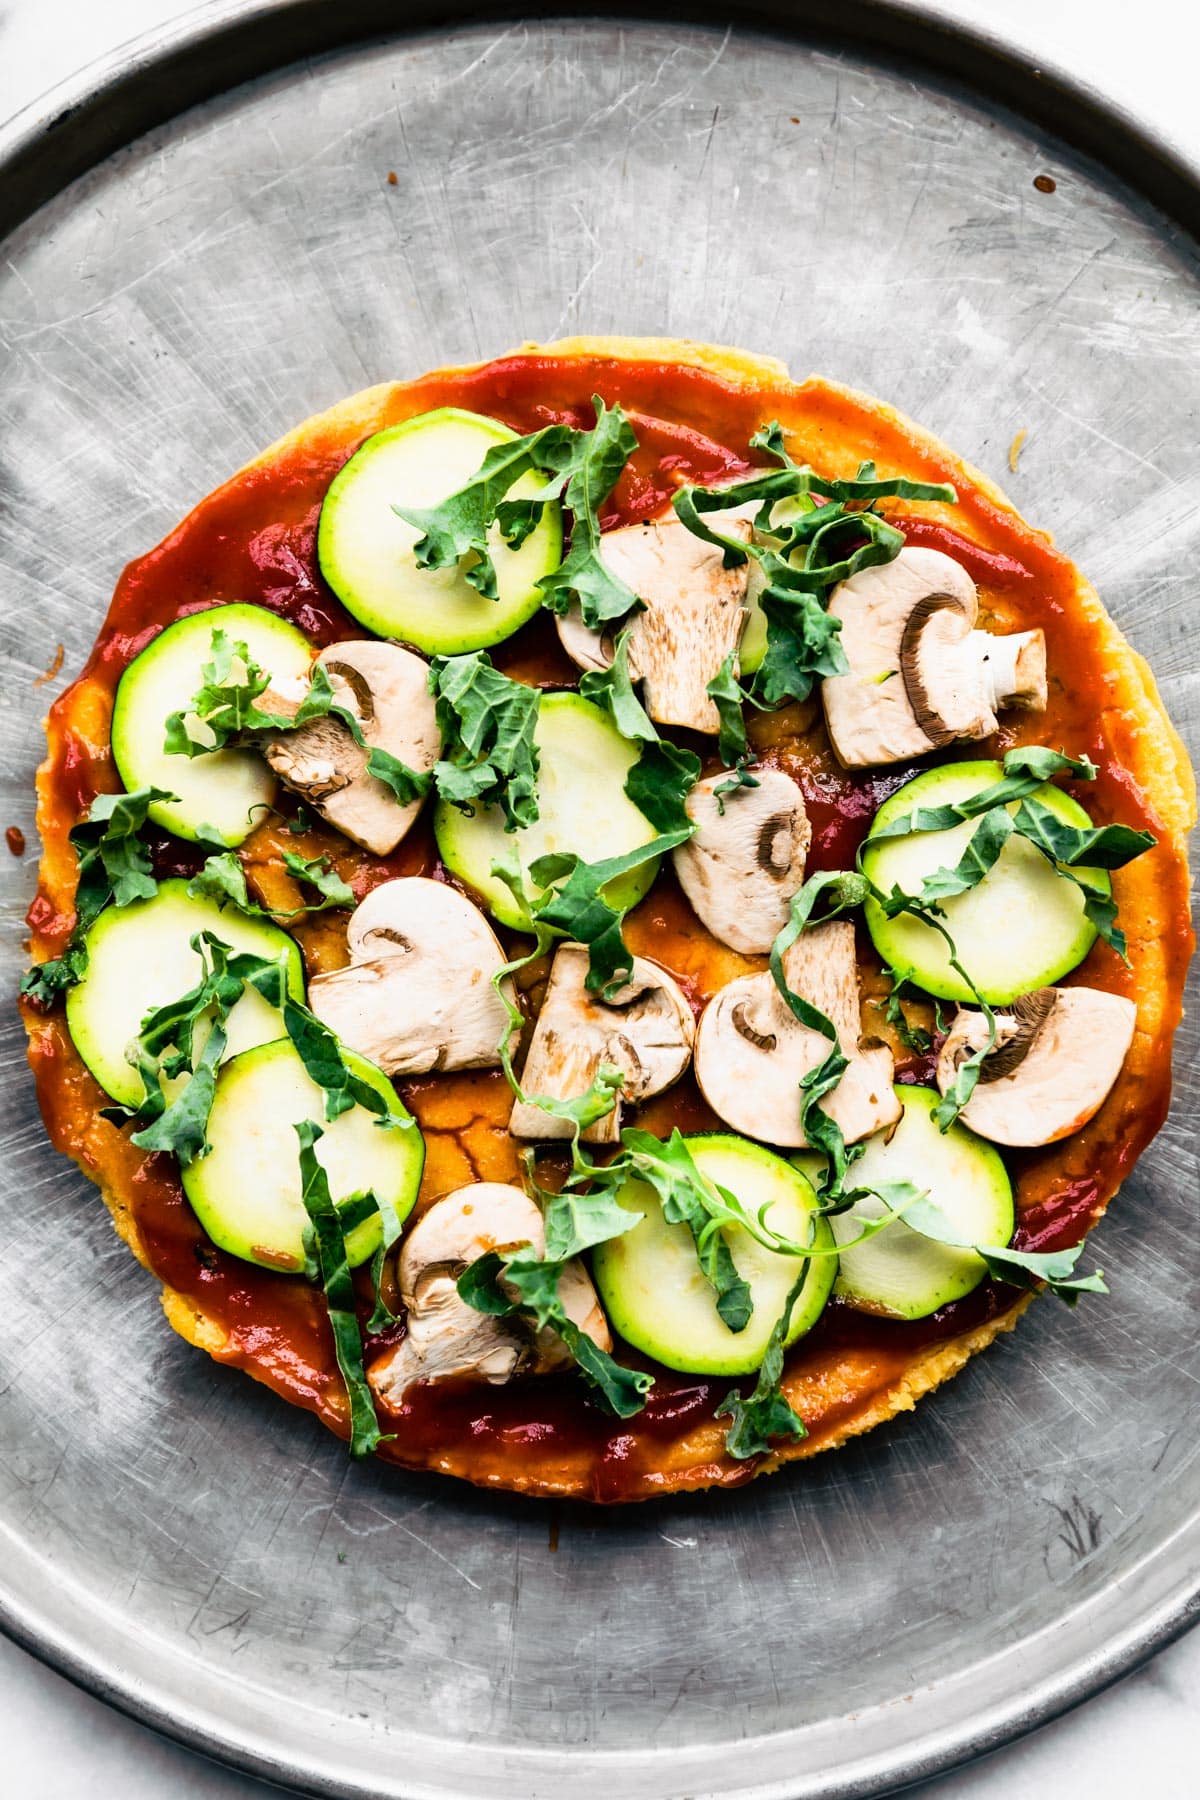 Socca Pizza topped with mushrooms, zucchini and sauce.